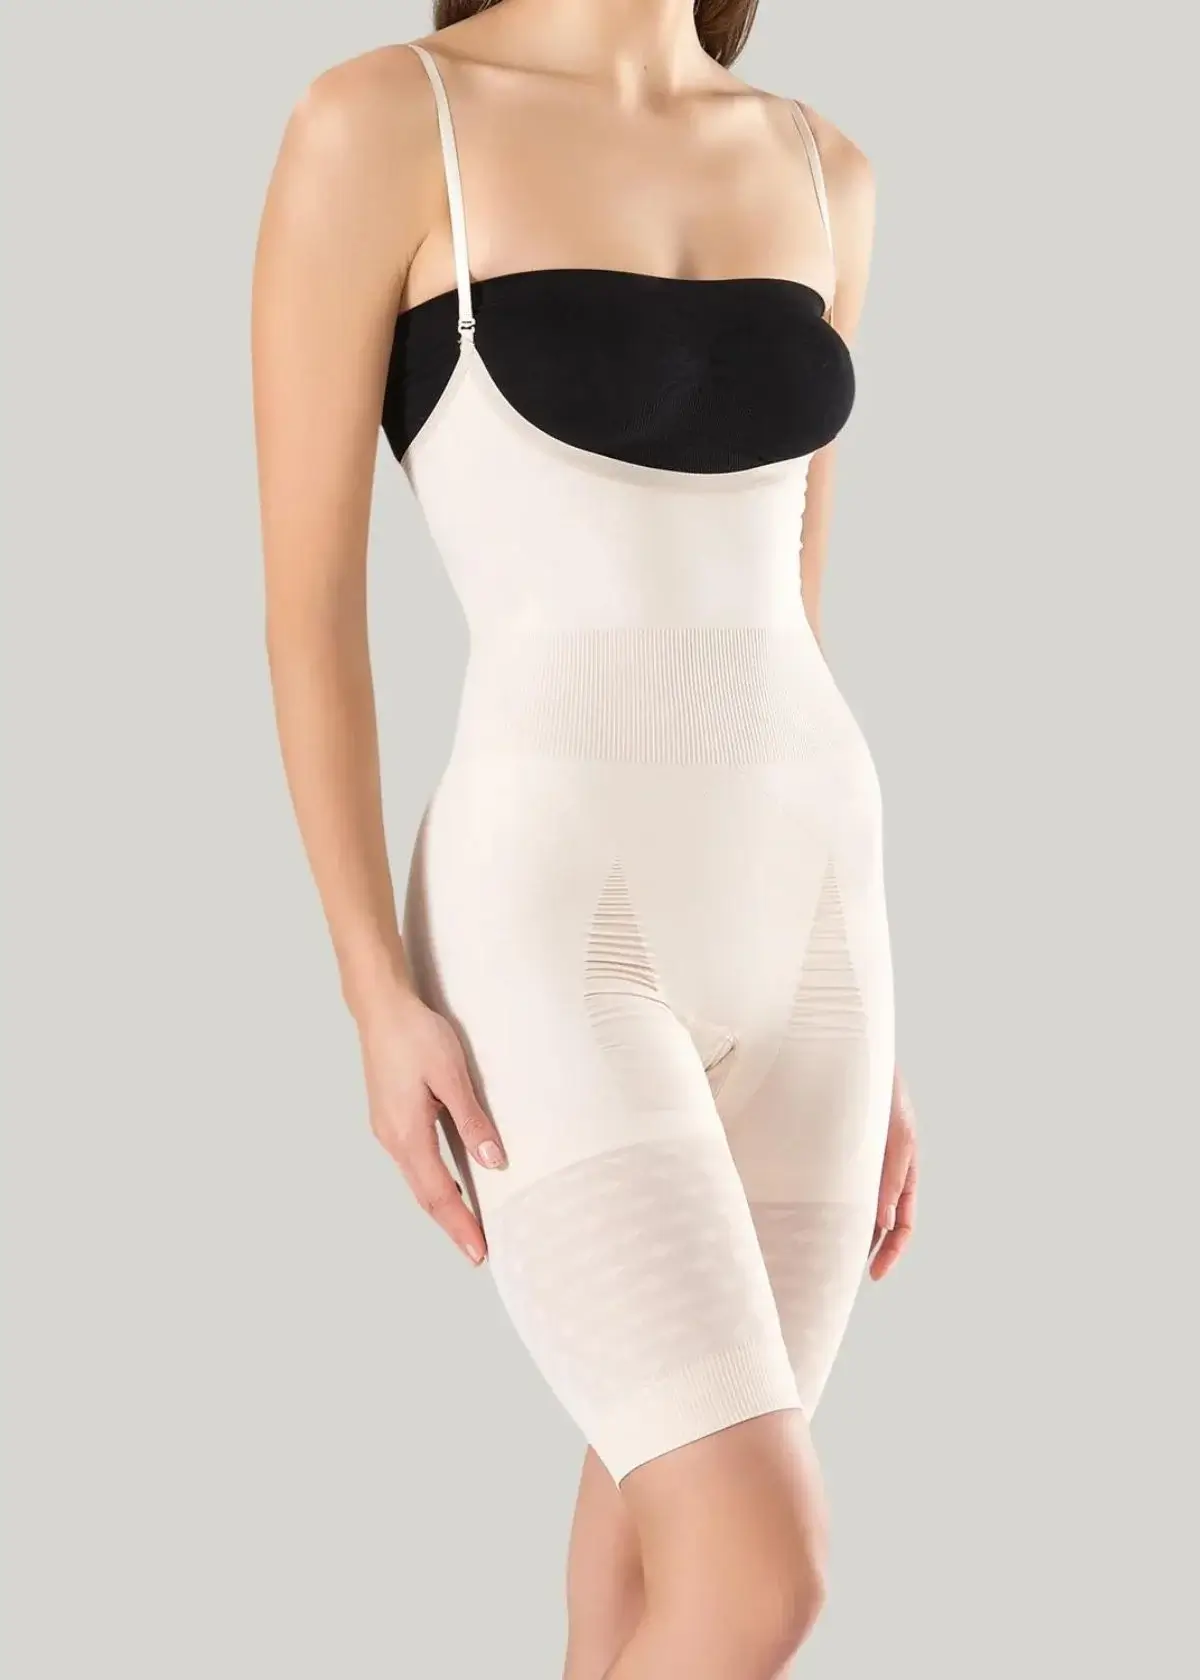 How to choose the right Women's Shapewear?